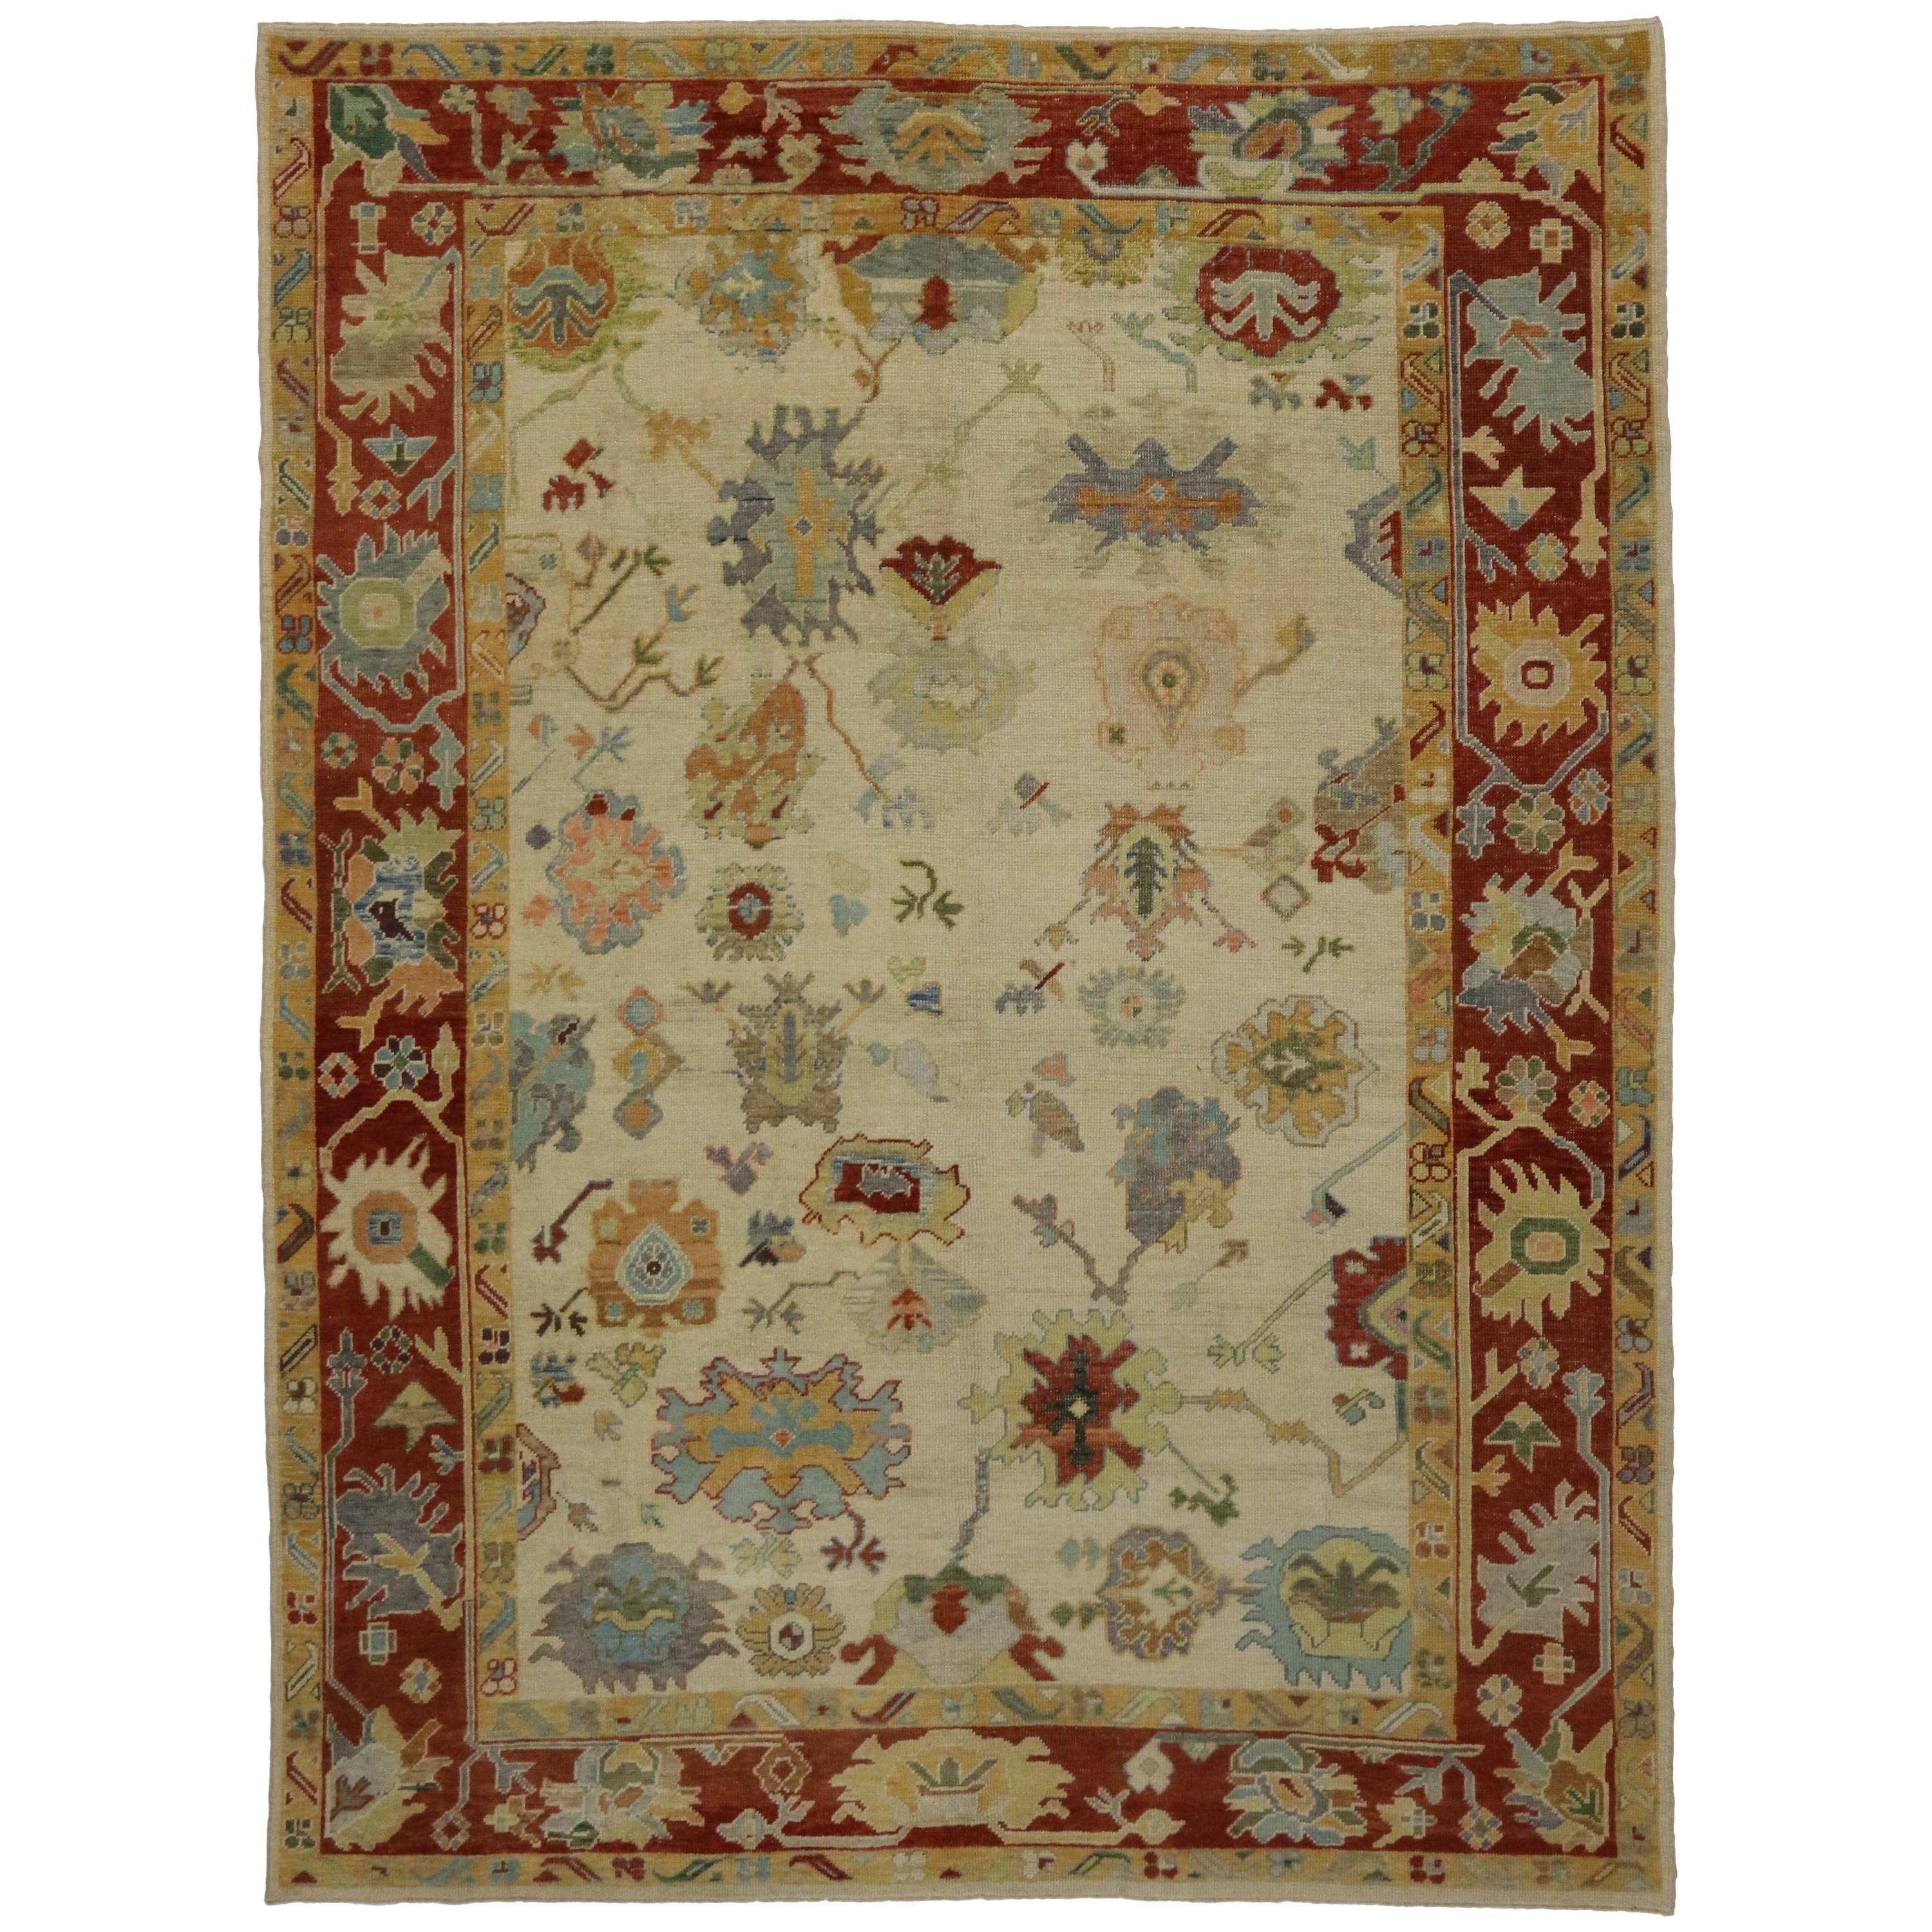 Modern Turkish Oushak Rug with Transitional Style in Traditional Colors